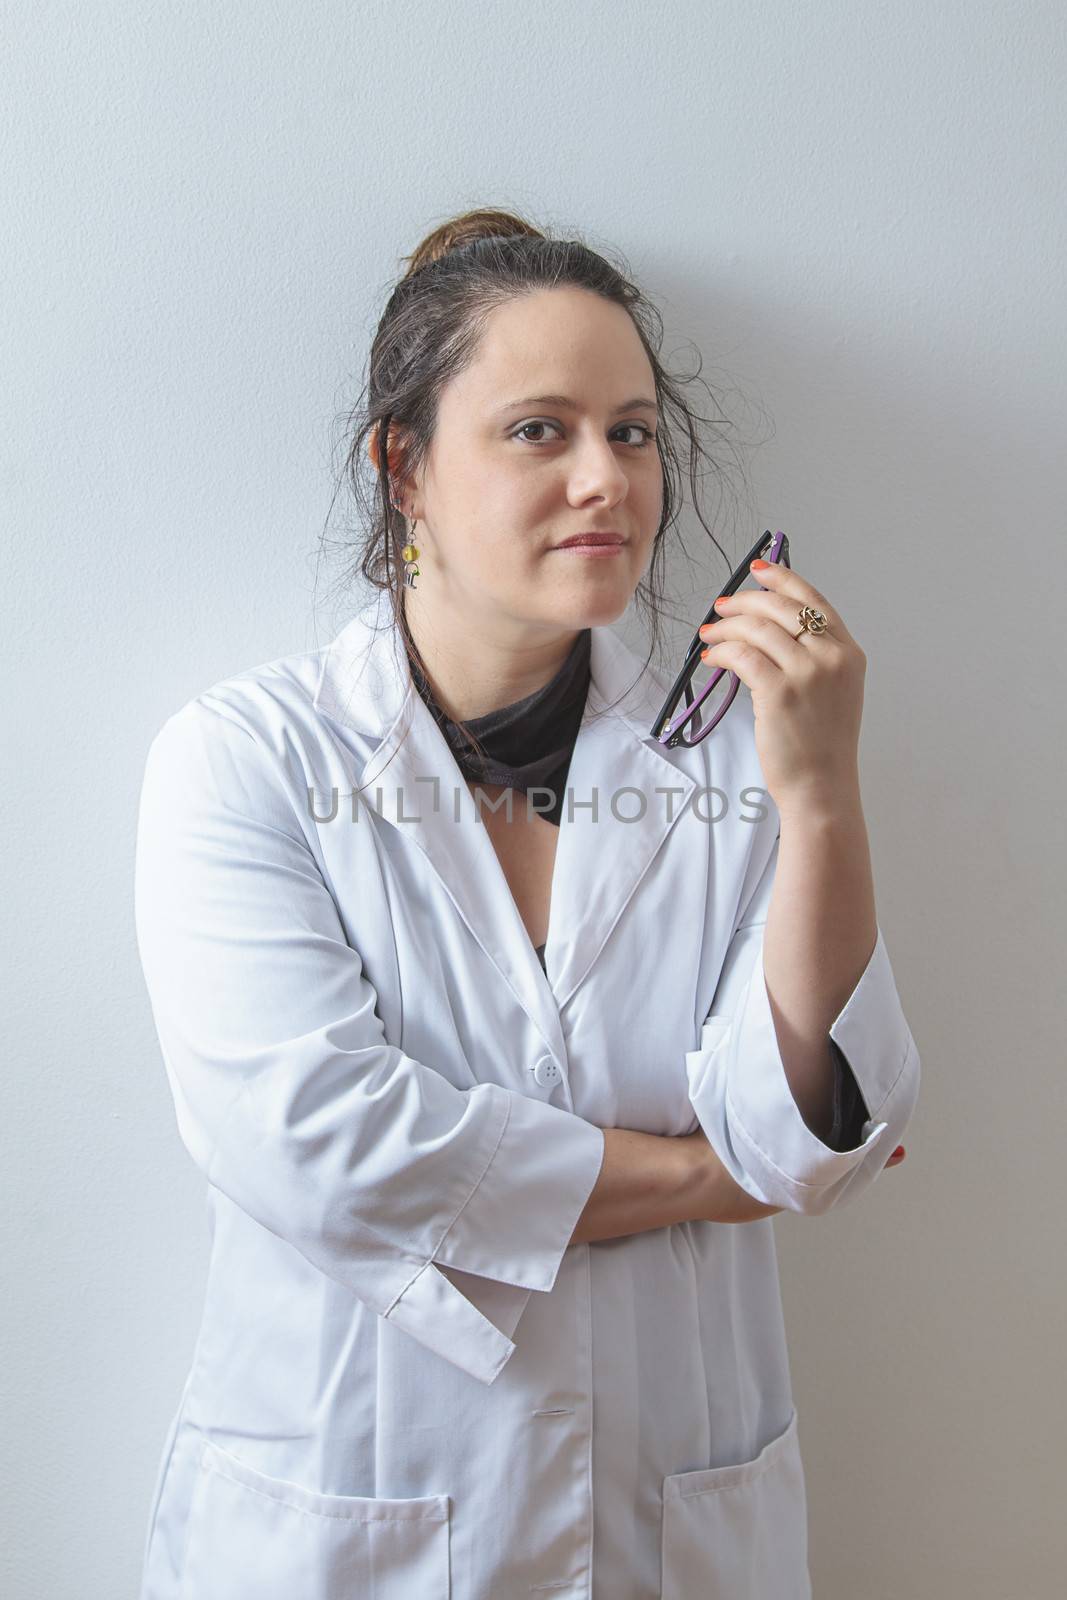 Woman doctor holding her glasses and leaning against a white wall